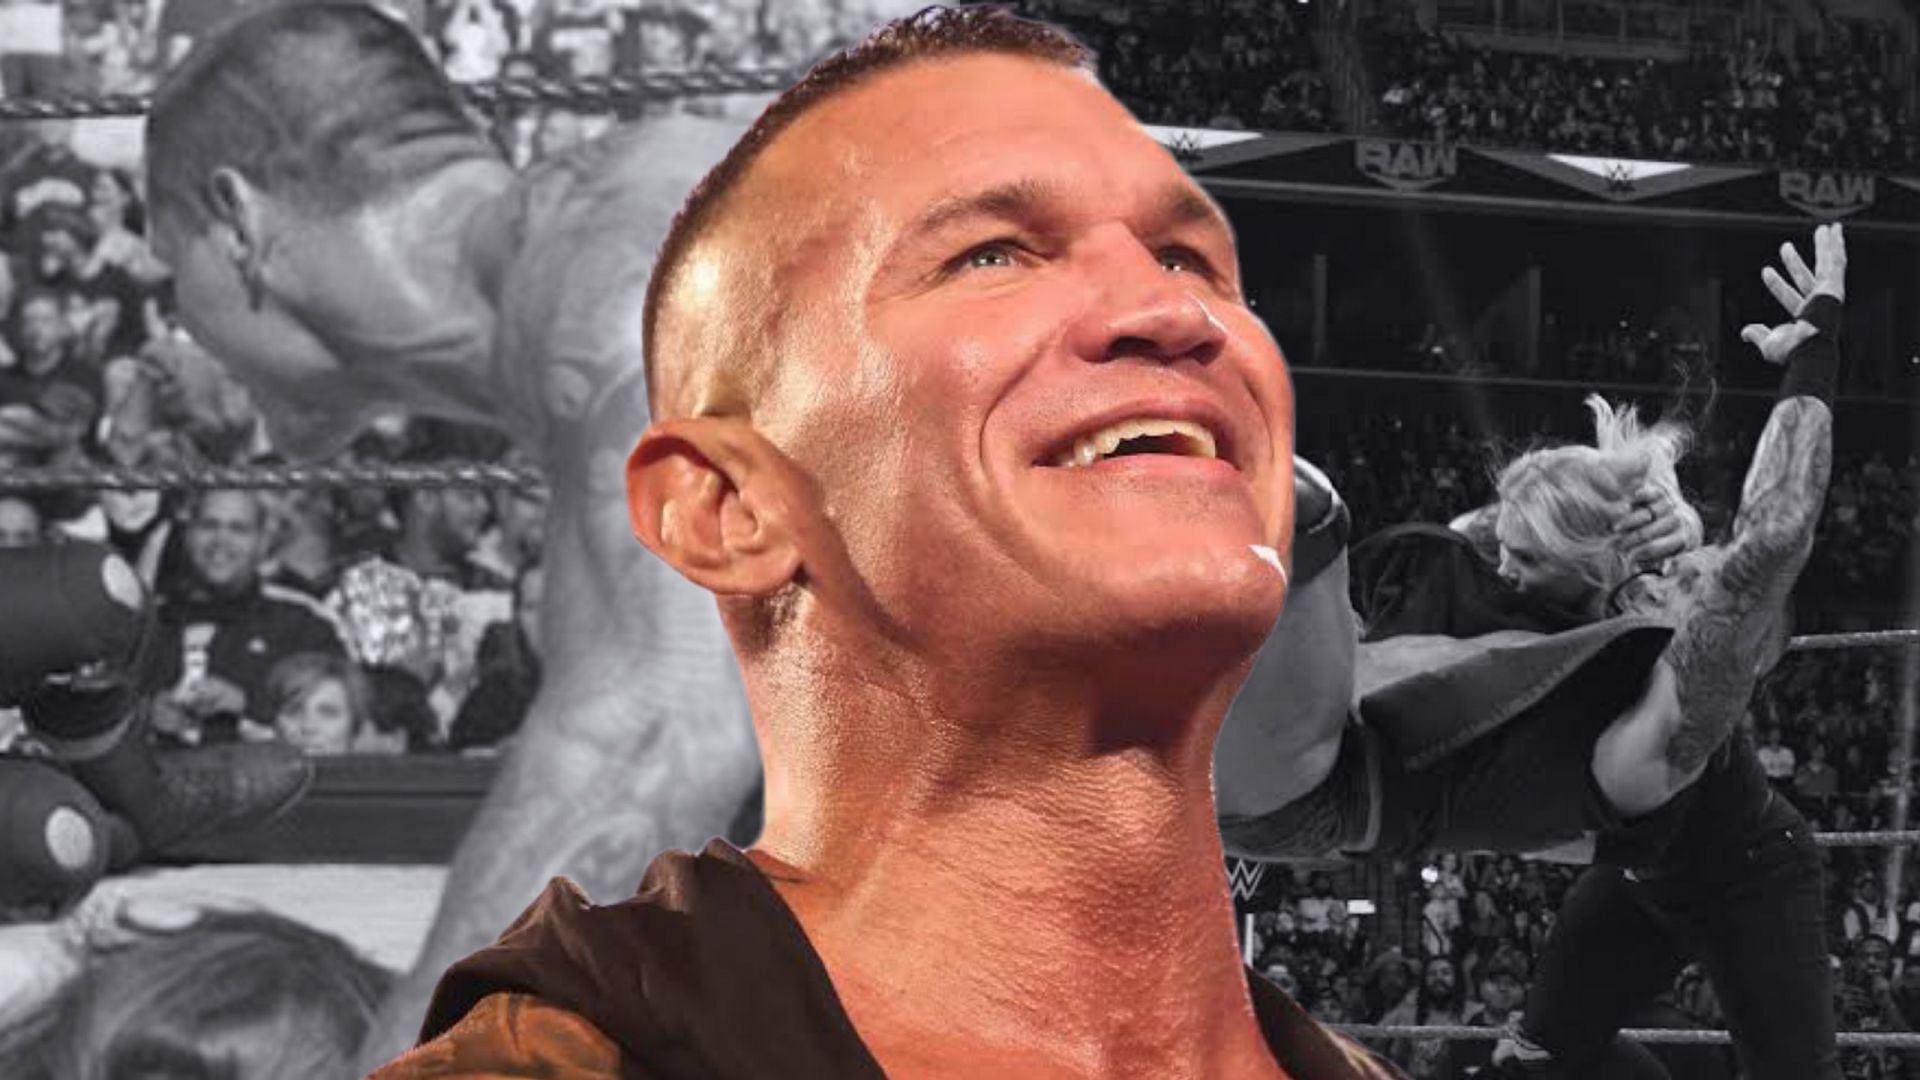 Randy Orton has crossed the limits on more than one occasion.